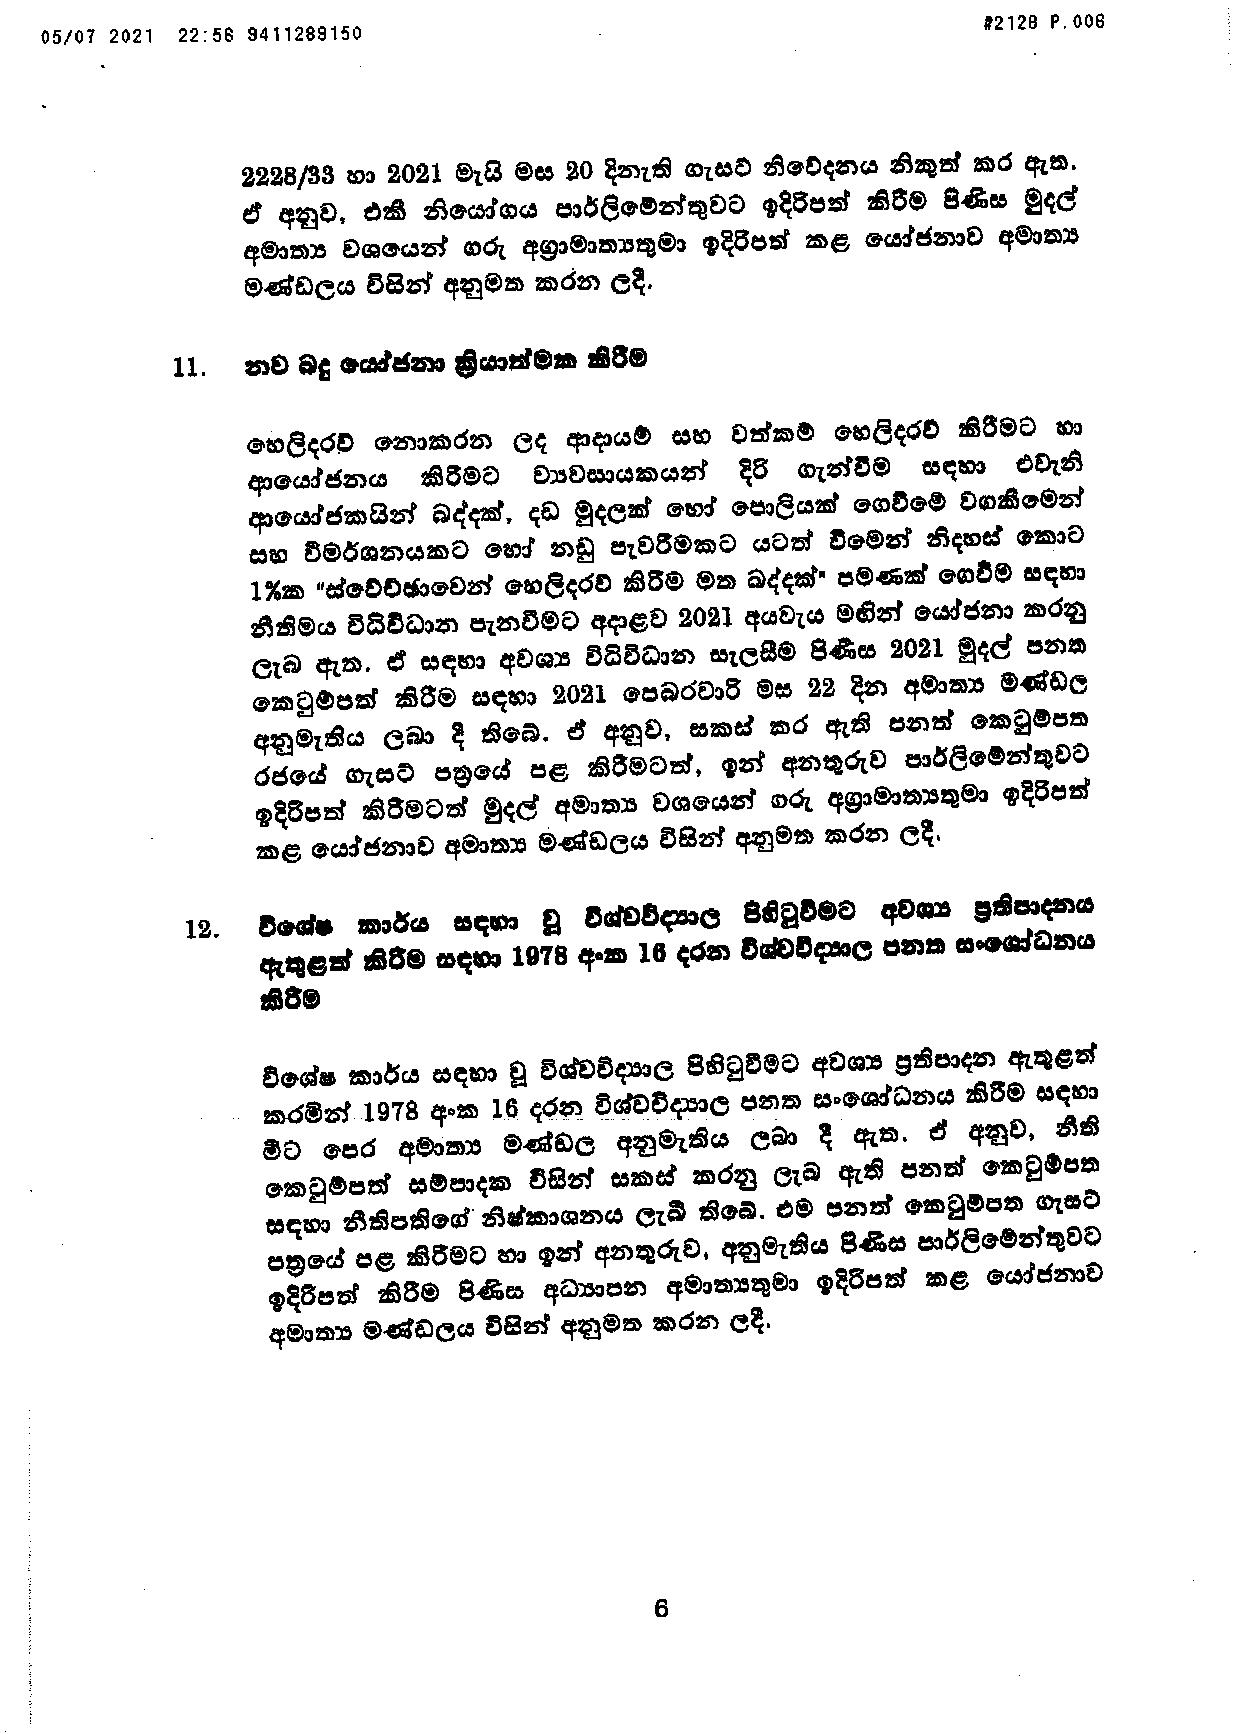 Cabinet Decision on 05.07.2021 page 006